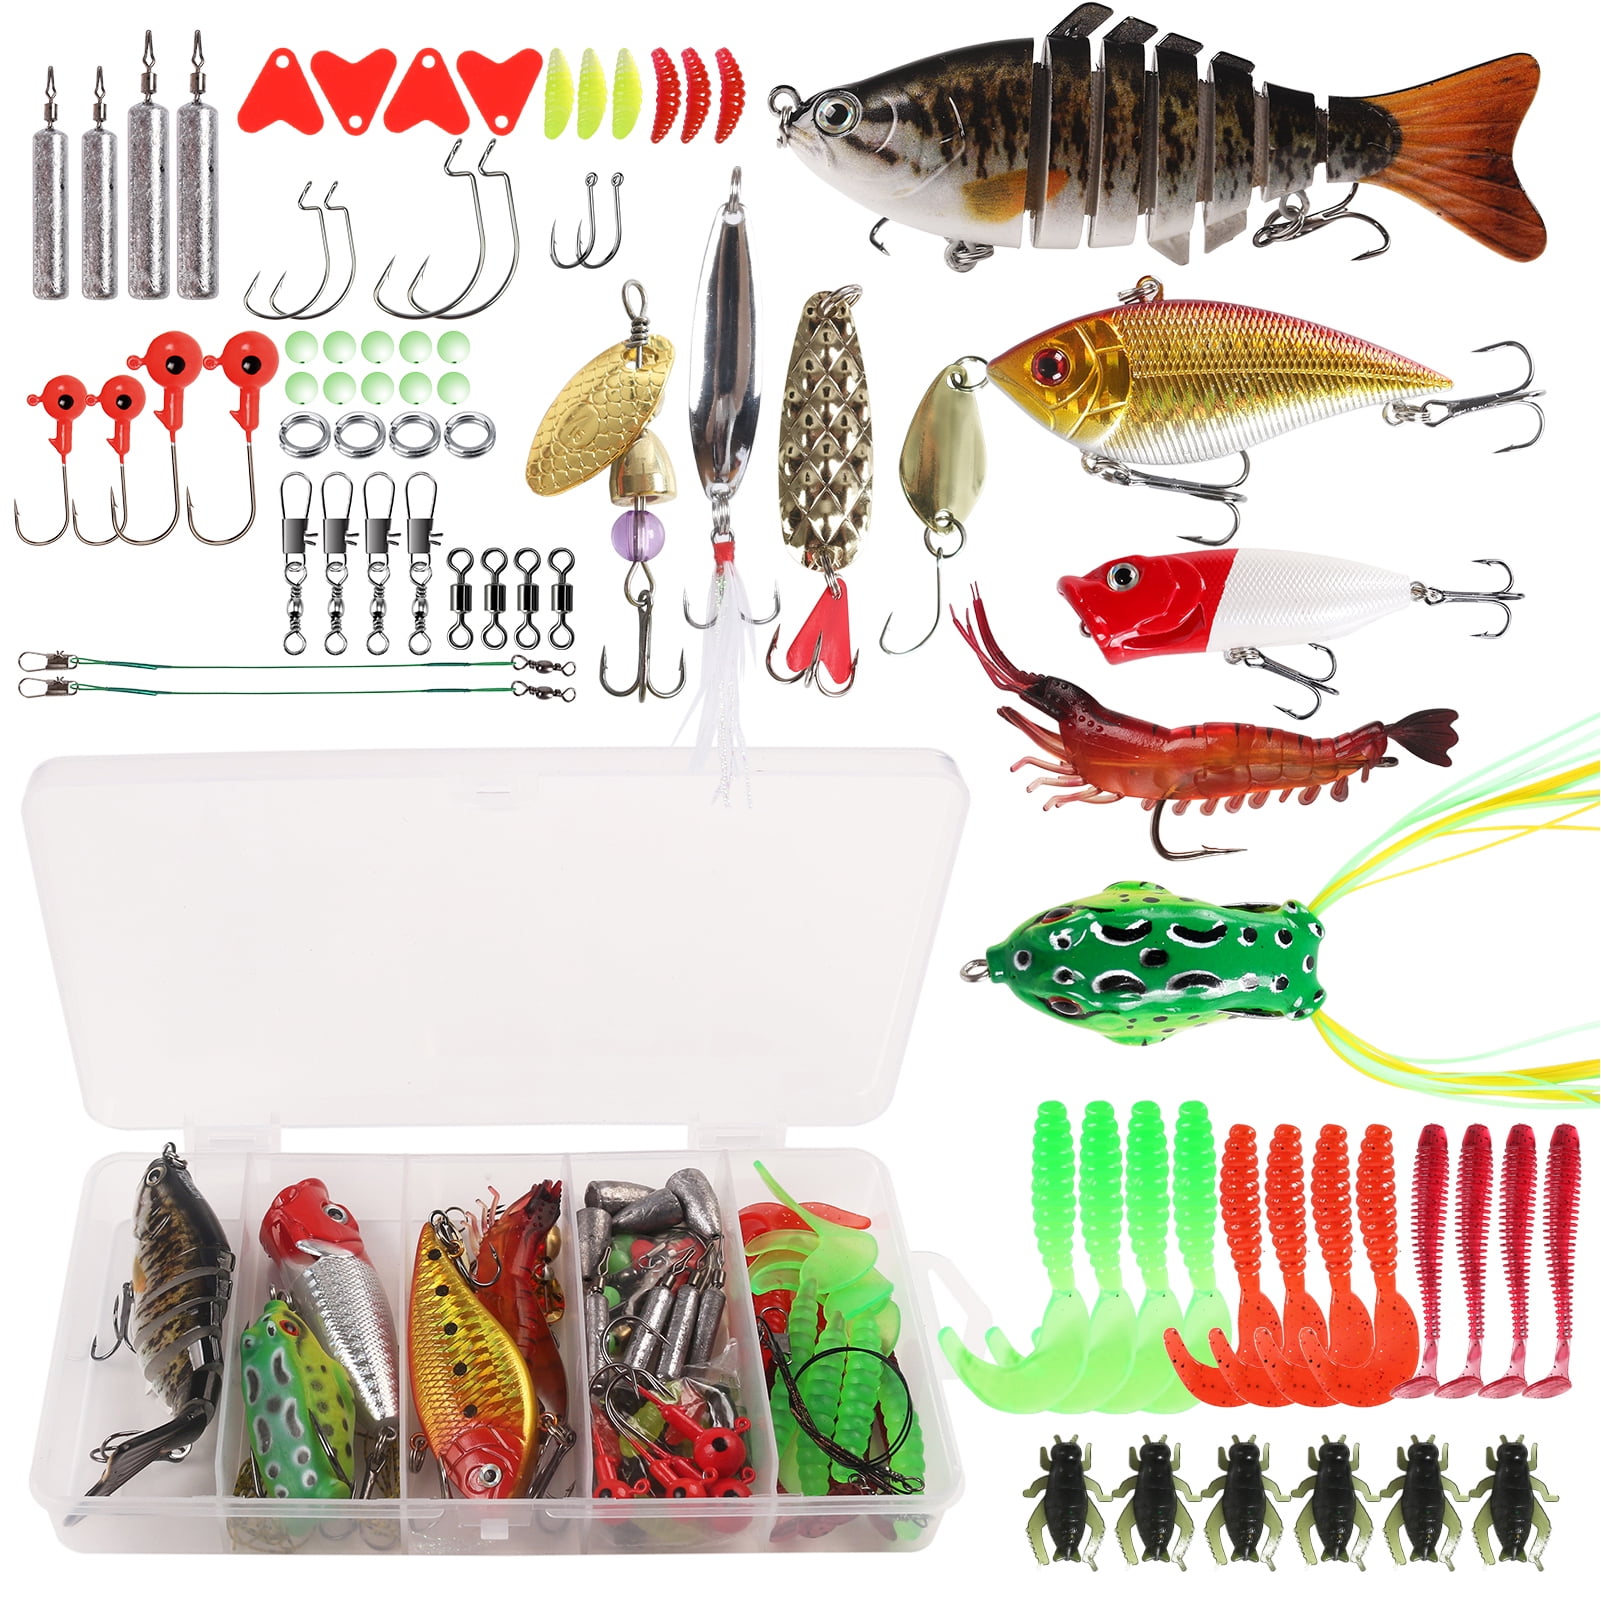 Trout Lures at low prices  Askari Fishing Tackle Online Shop